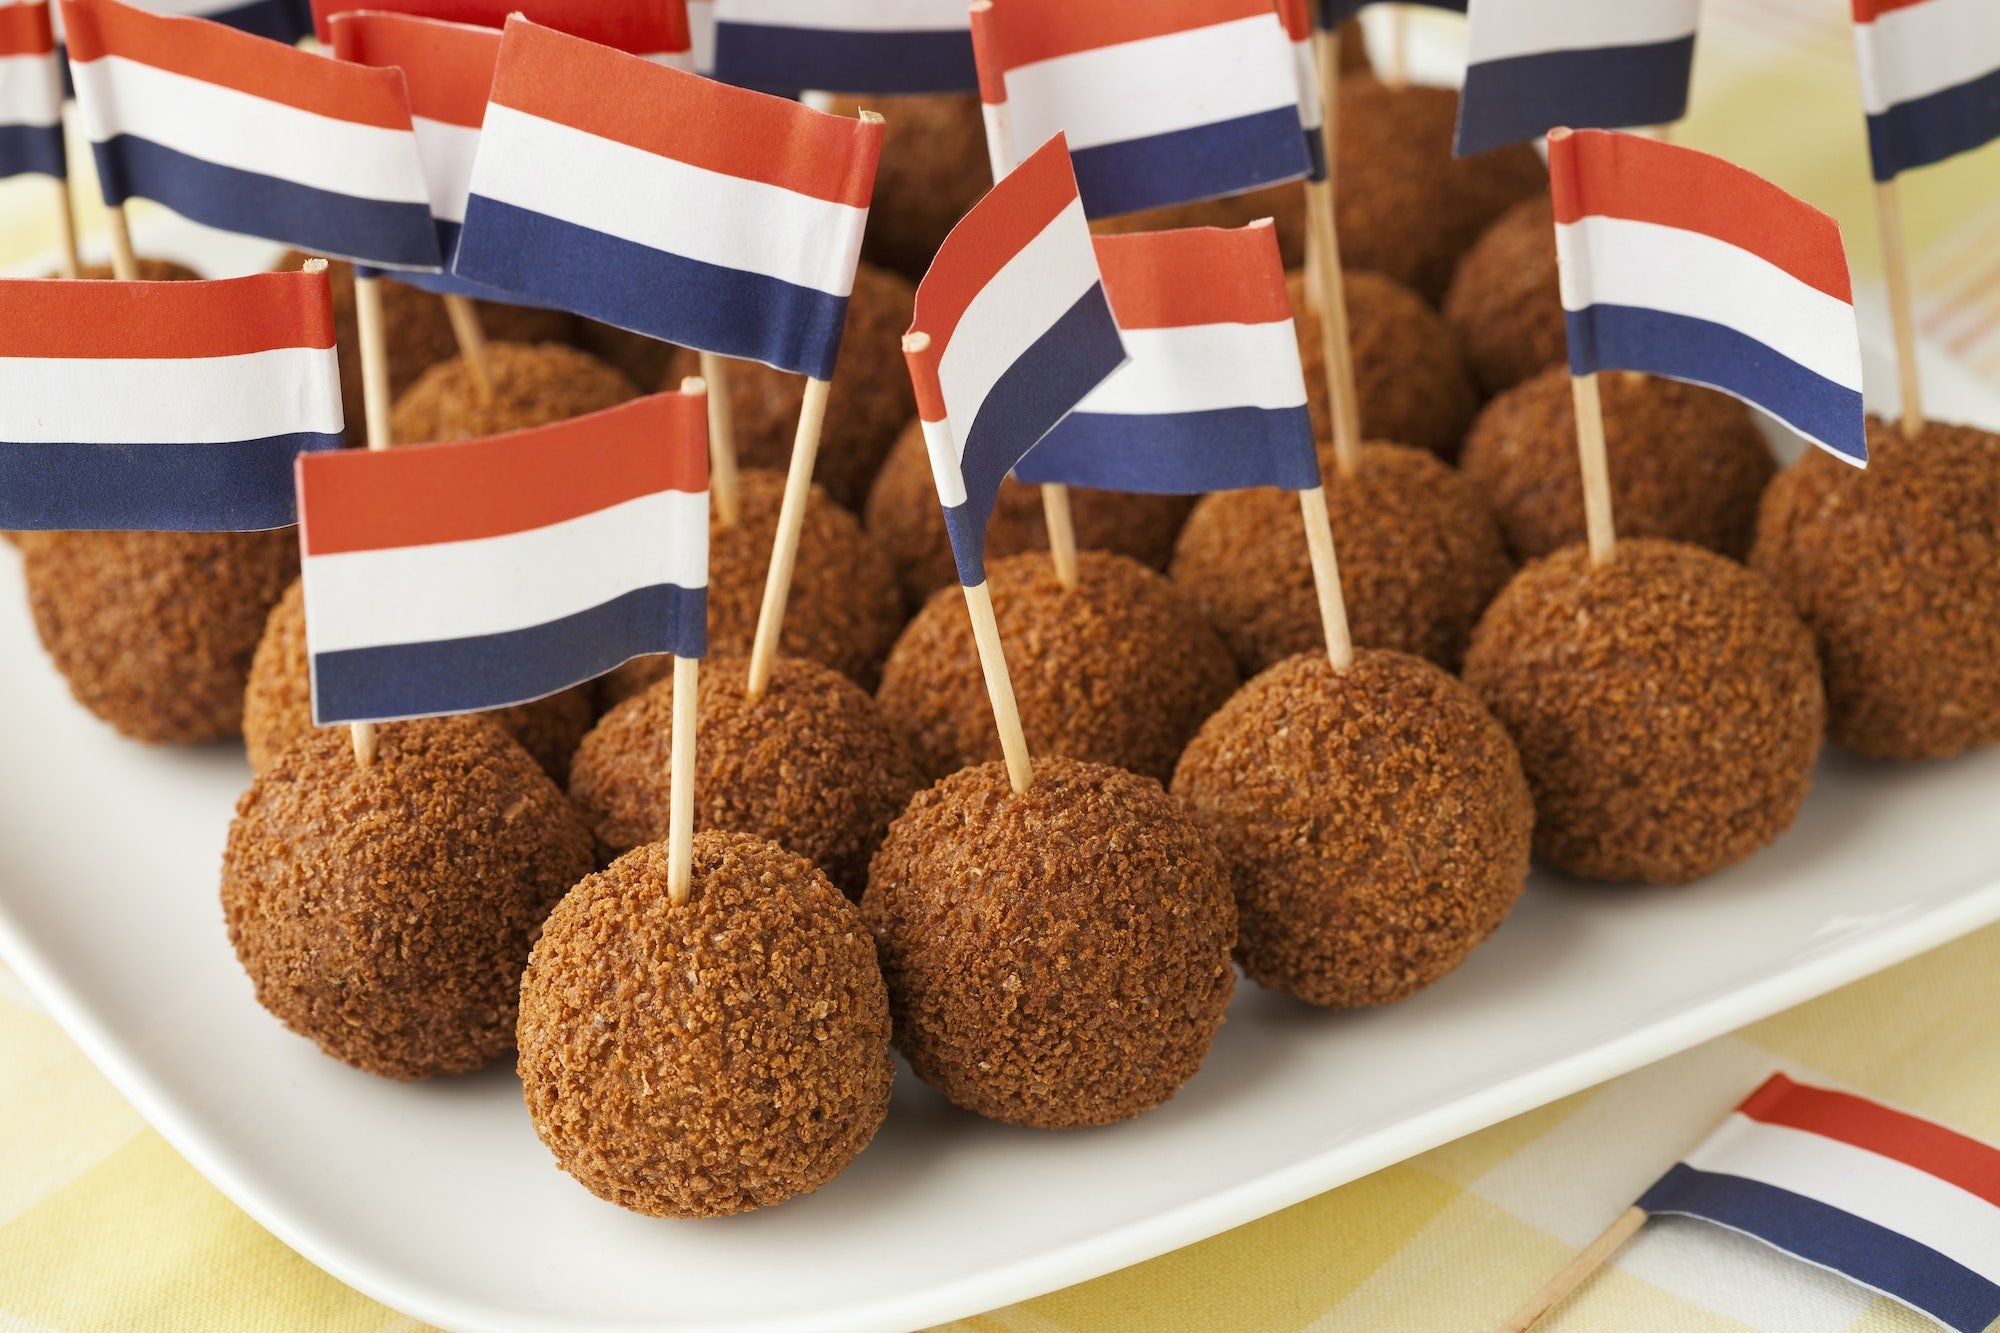 Dutch traditional snack bitterballen with a dutch flag